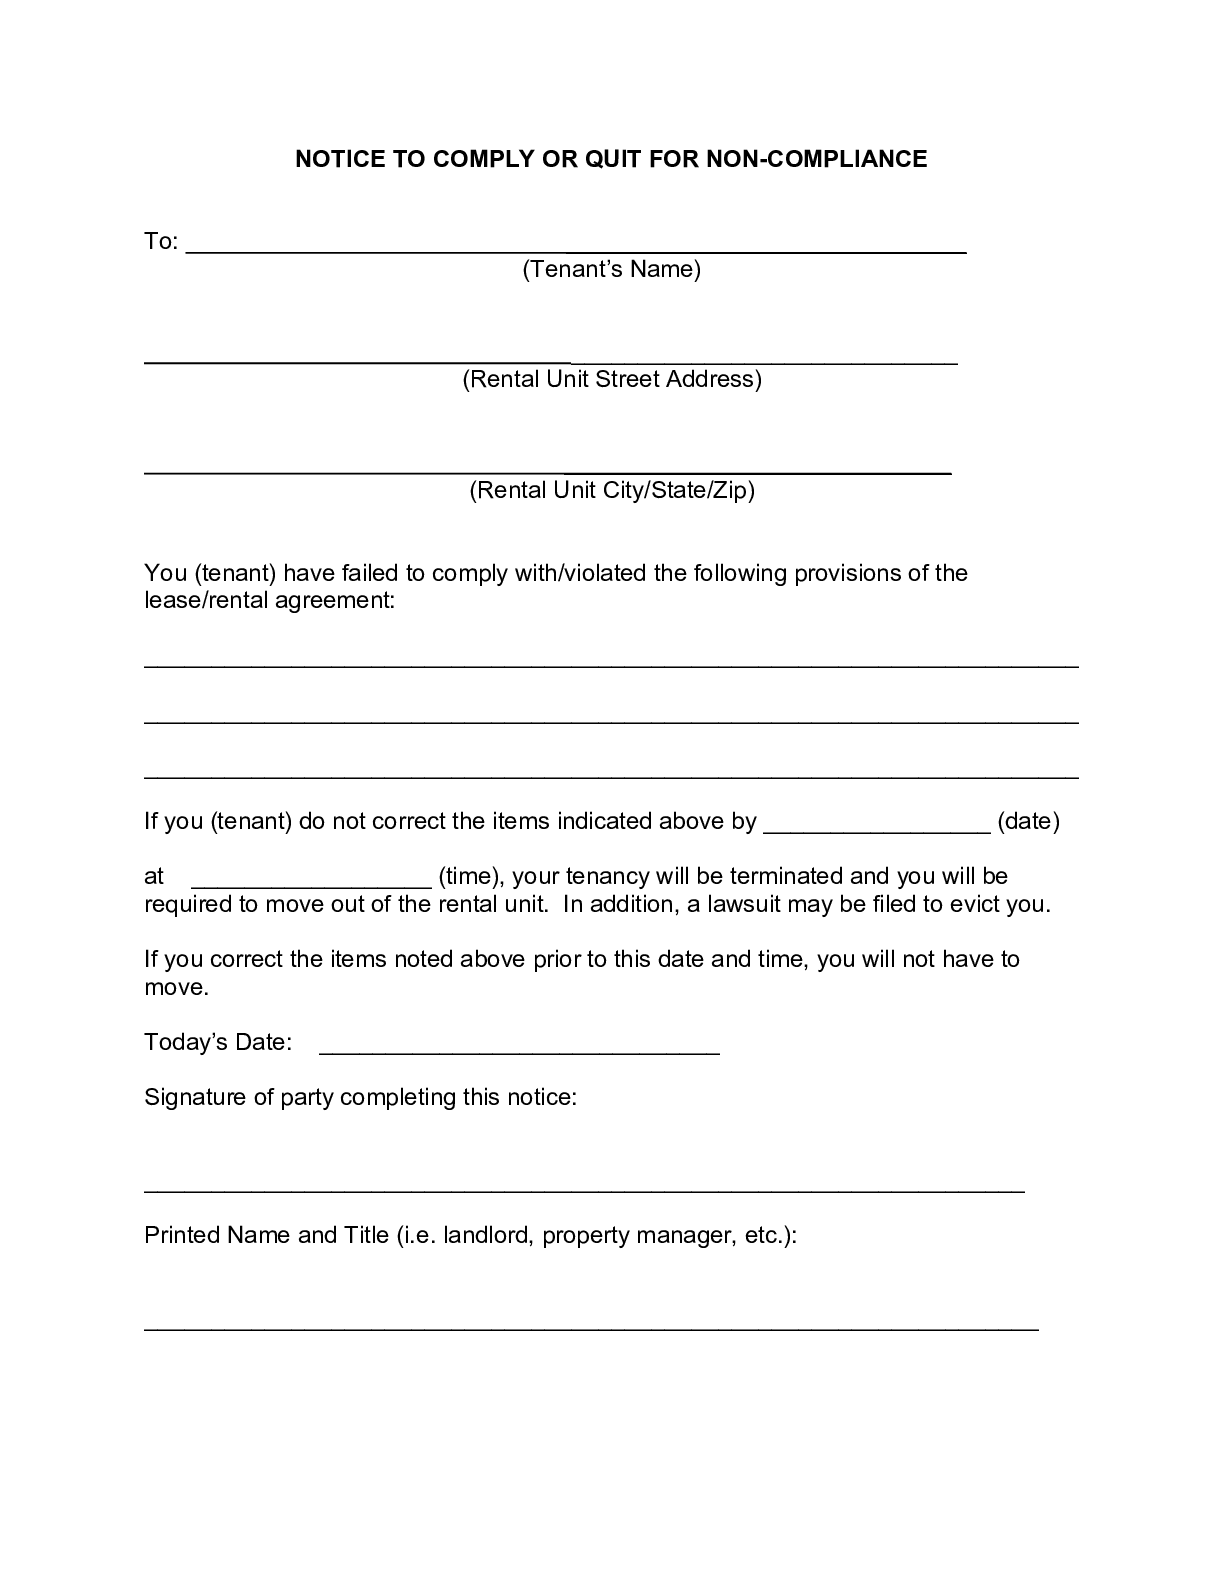 FREE Alabama Eviction Notice Form [2021] Notice to Vacate PDF